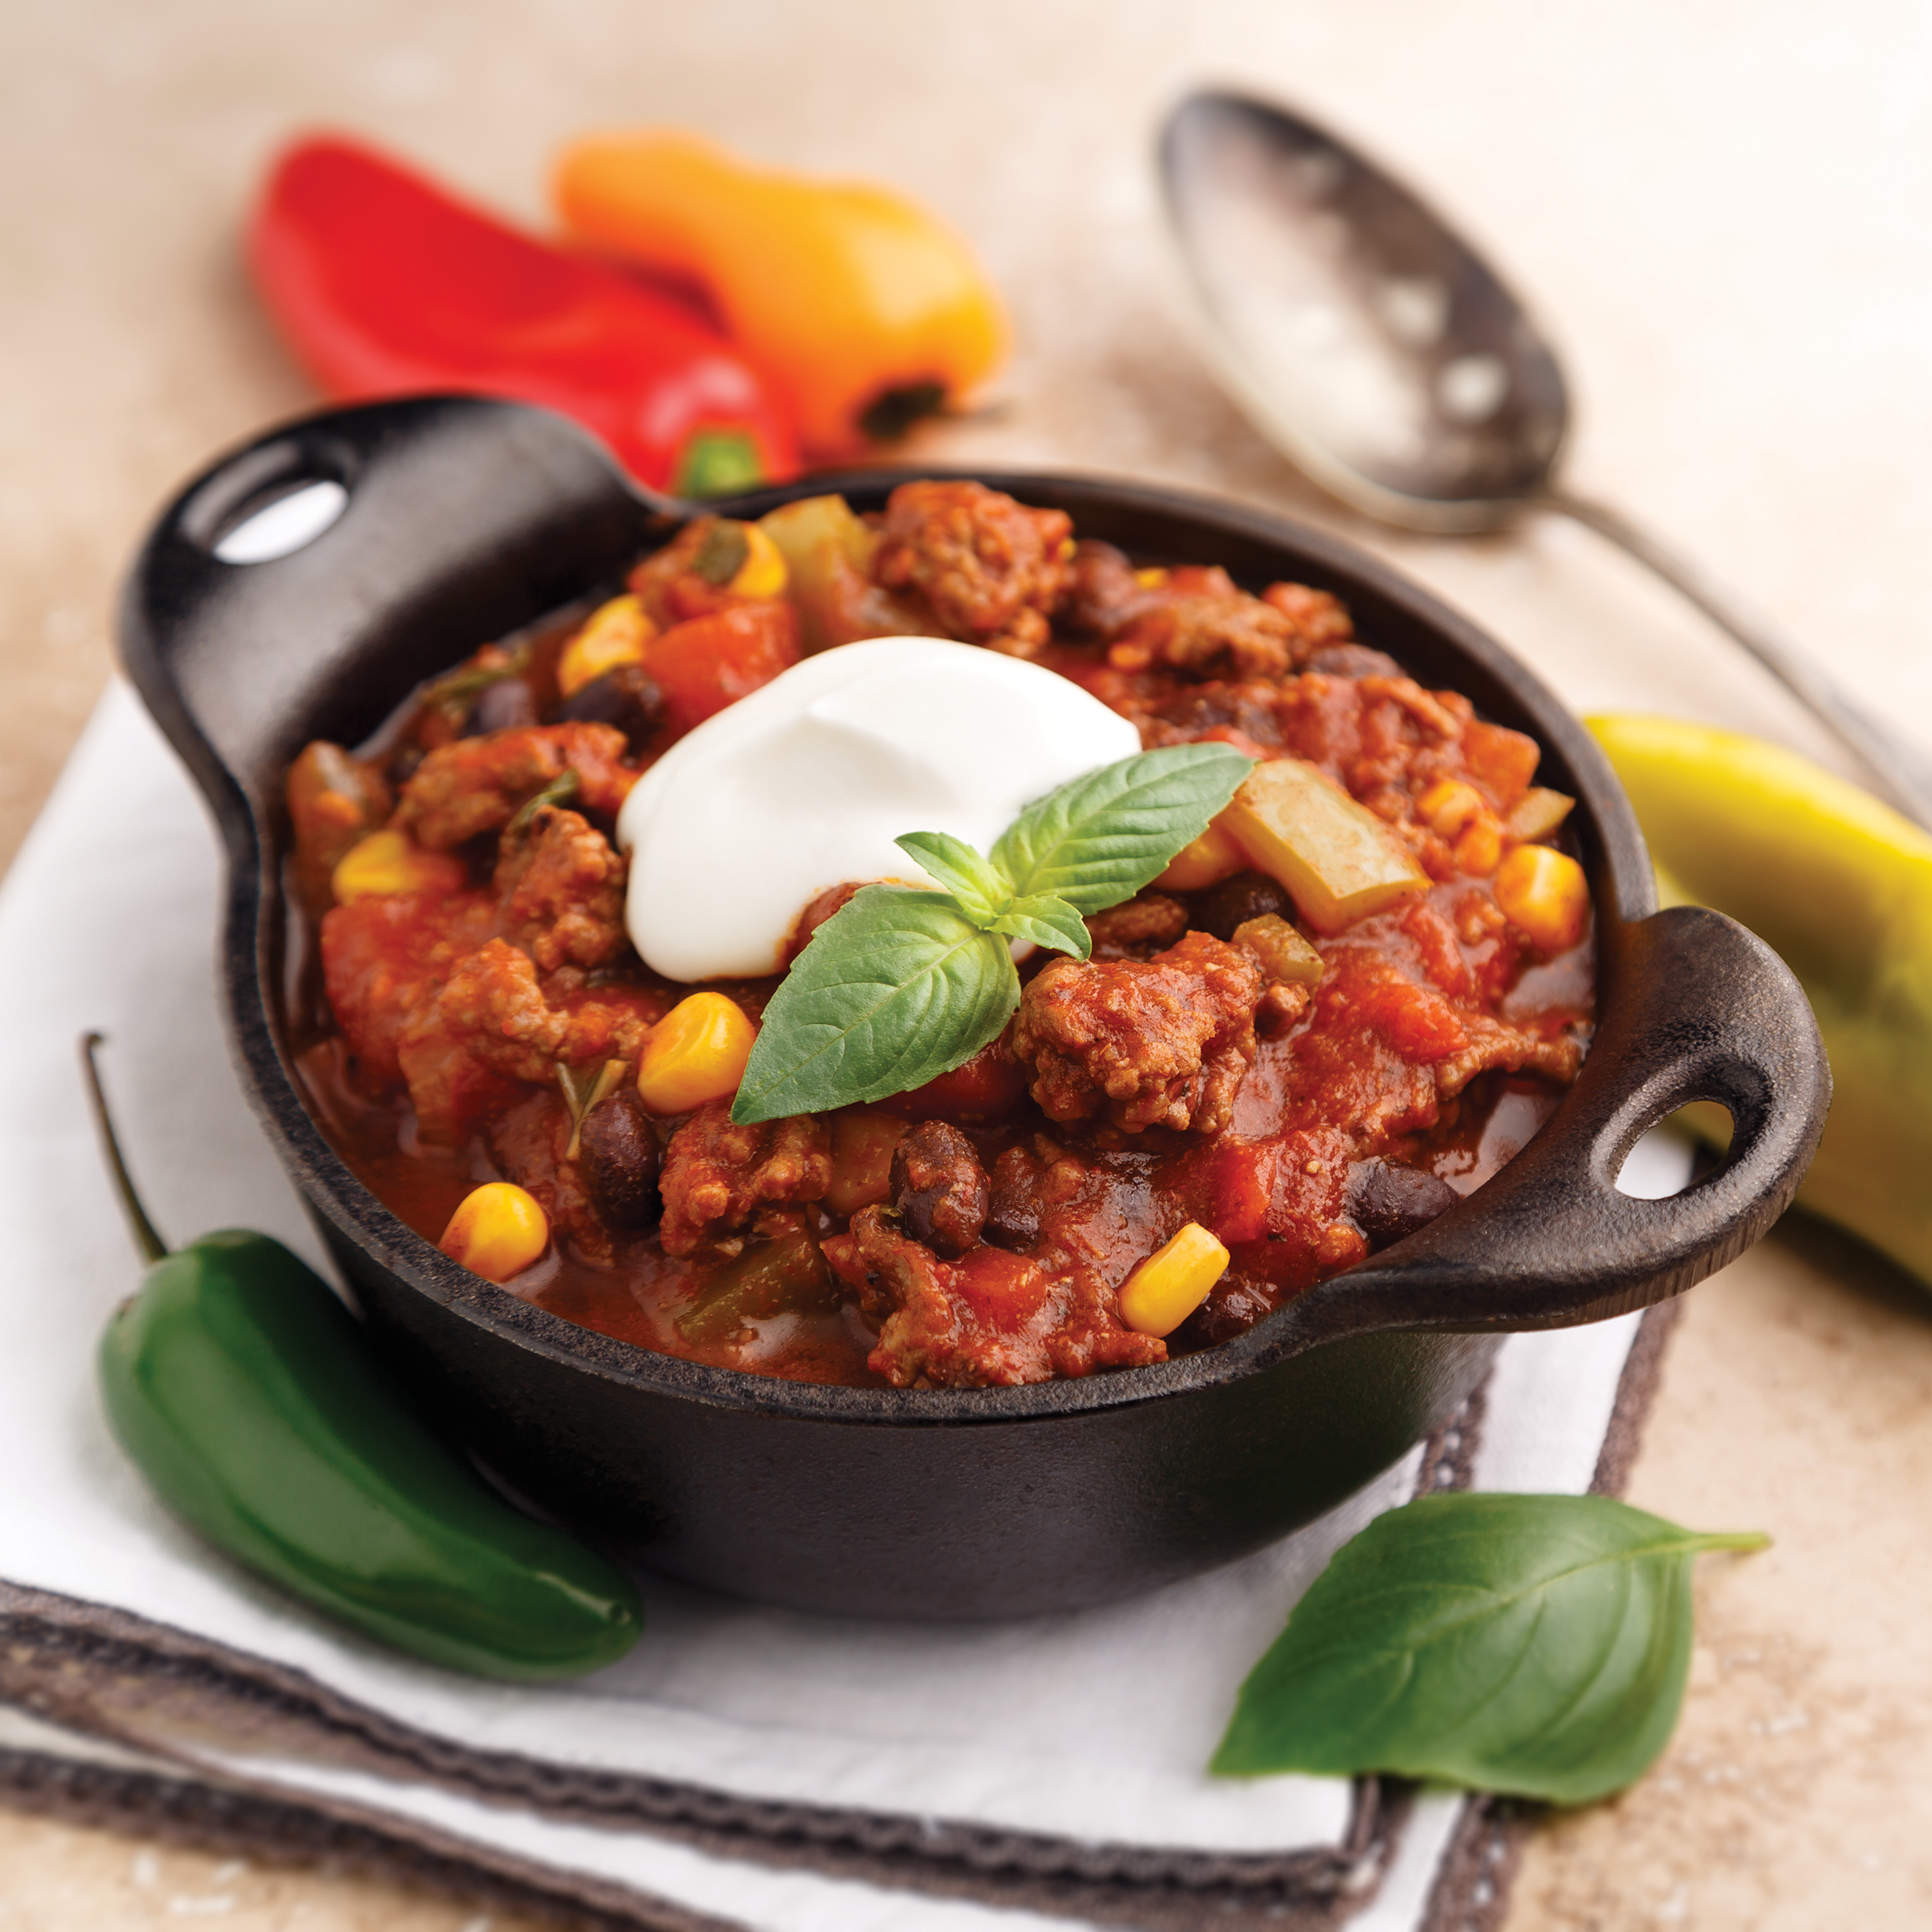 A half cup of Mona's southwestern chili is a 100-calorie portion.